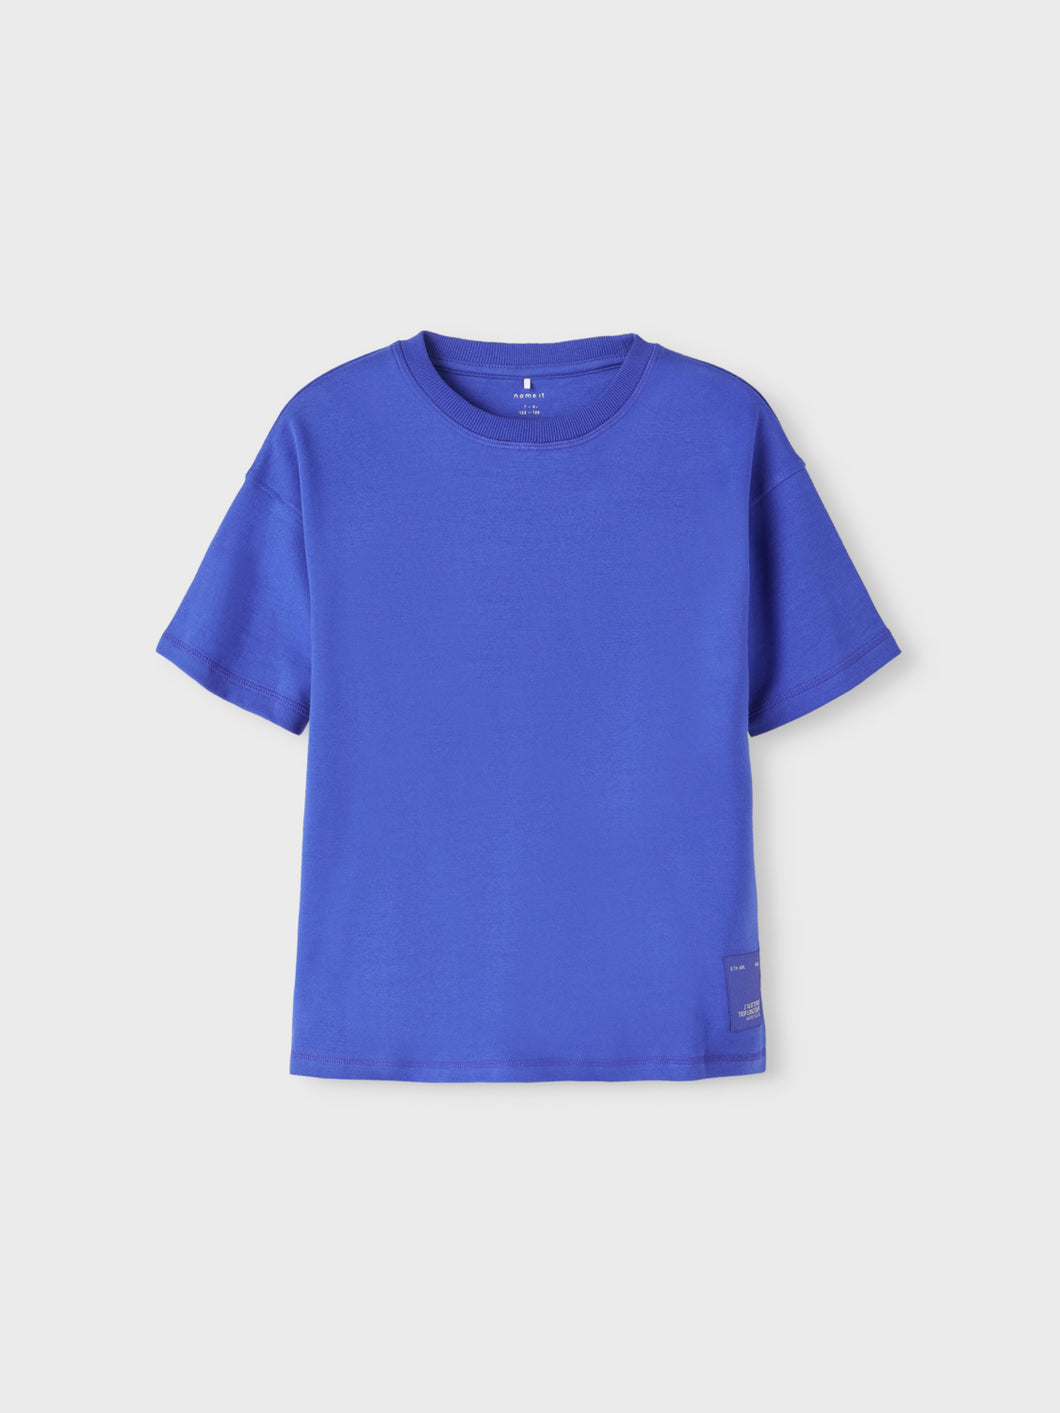 NKMROSSI T-shirts & Tops - Bluing